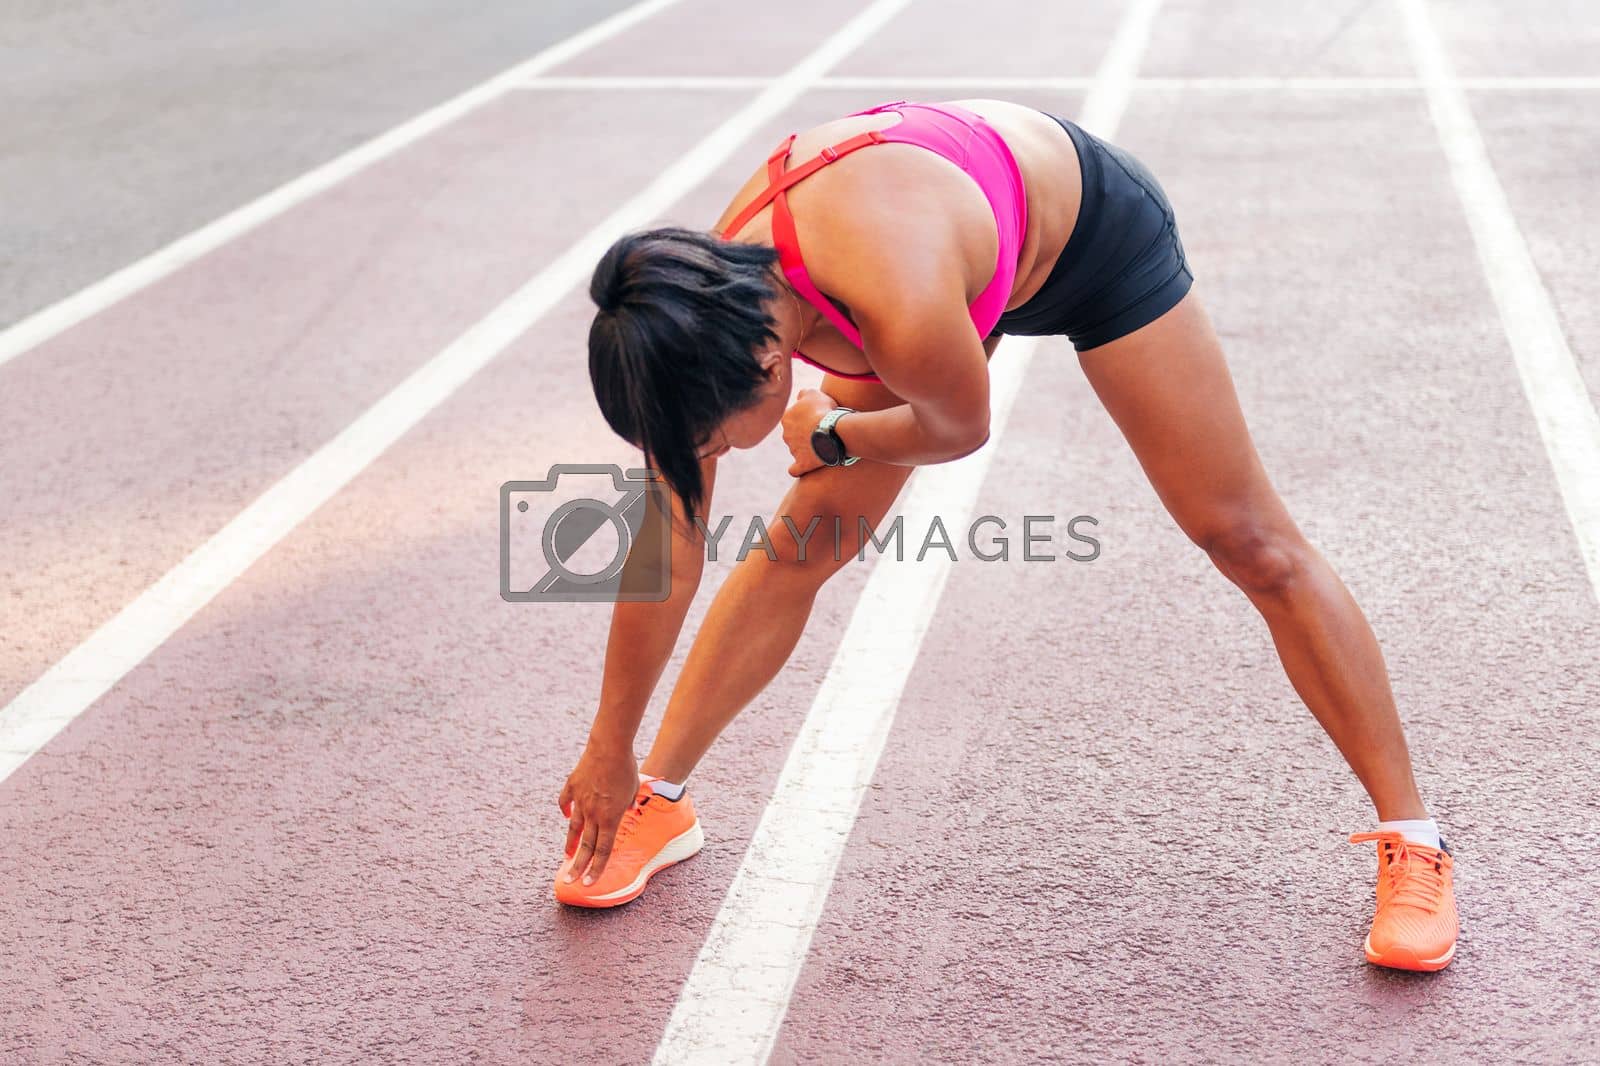 Royalty free image of sportswoman stretching legs on the athletics track by raulmelldo